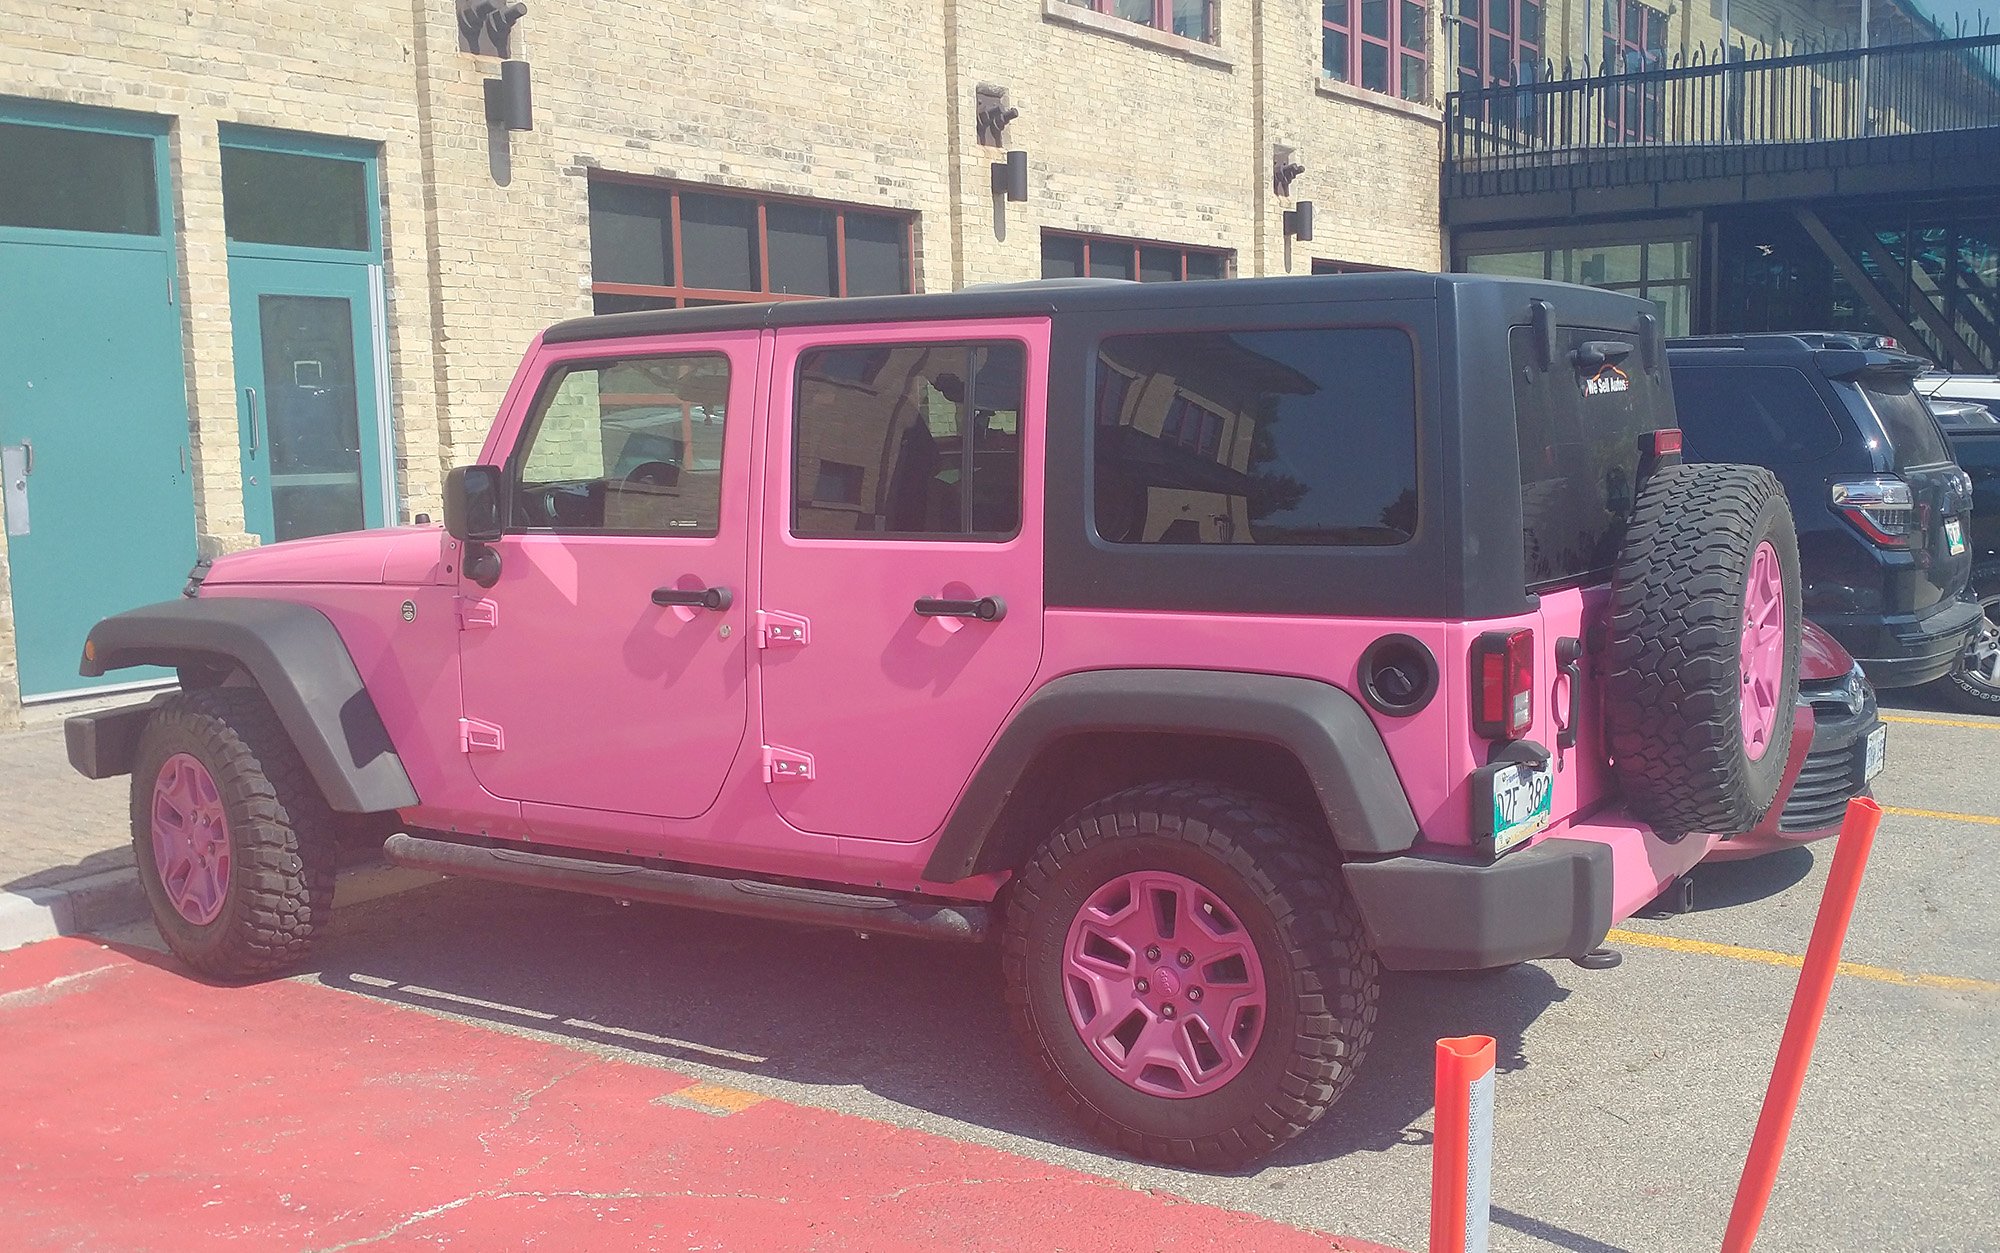 Expensive looking pink jeep in the touristy part of town called "The Forks".